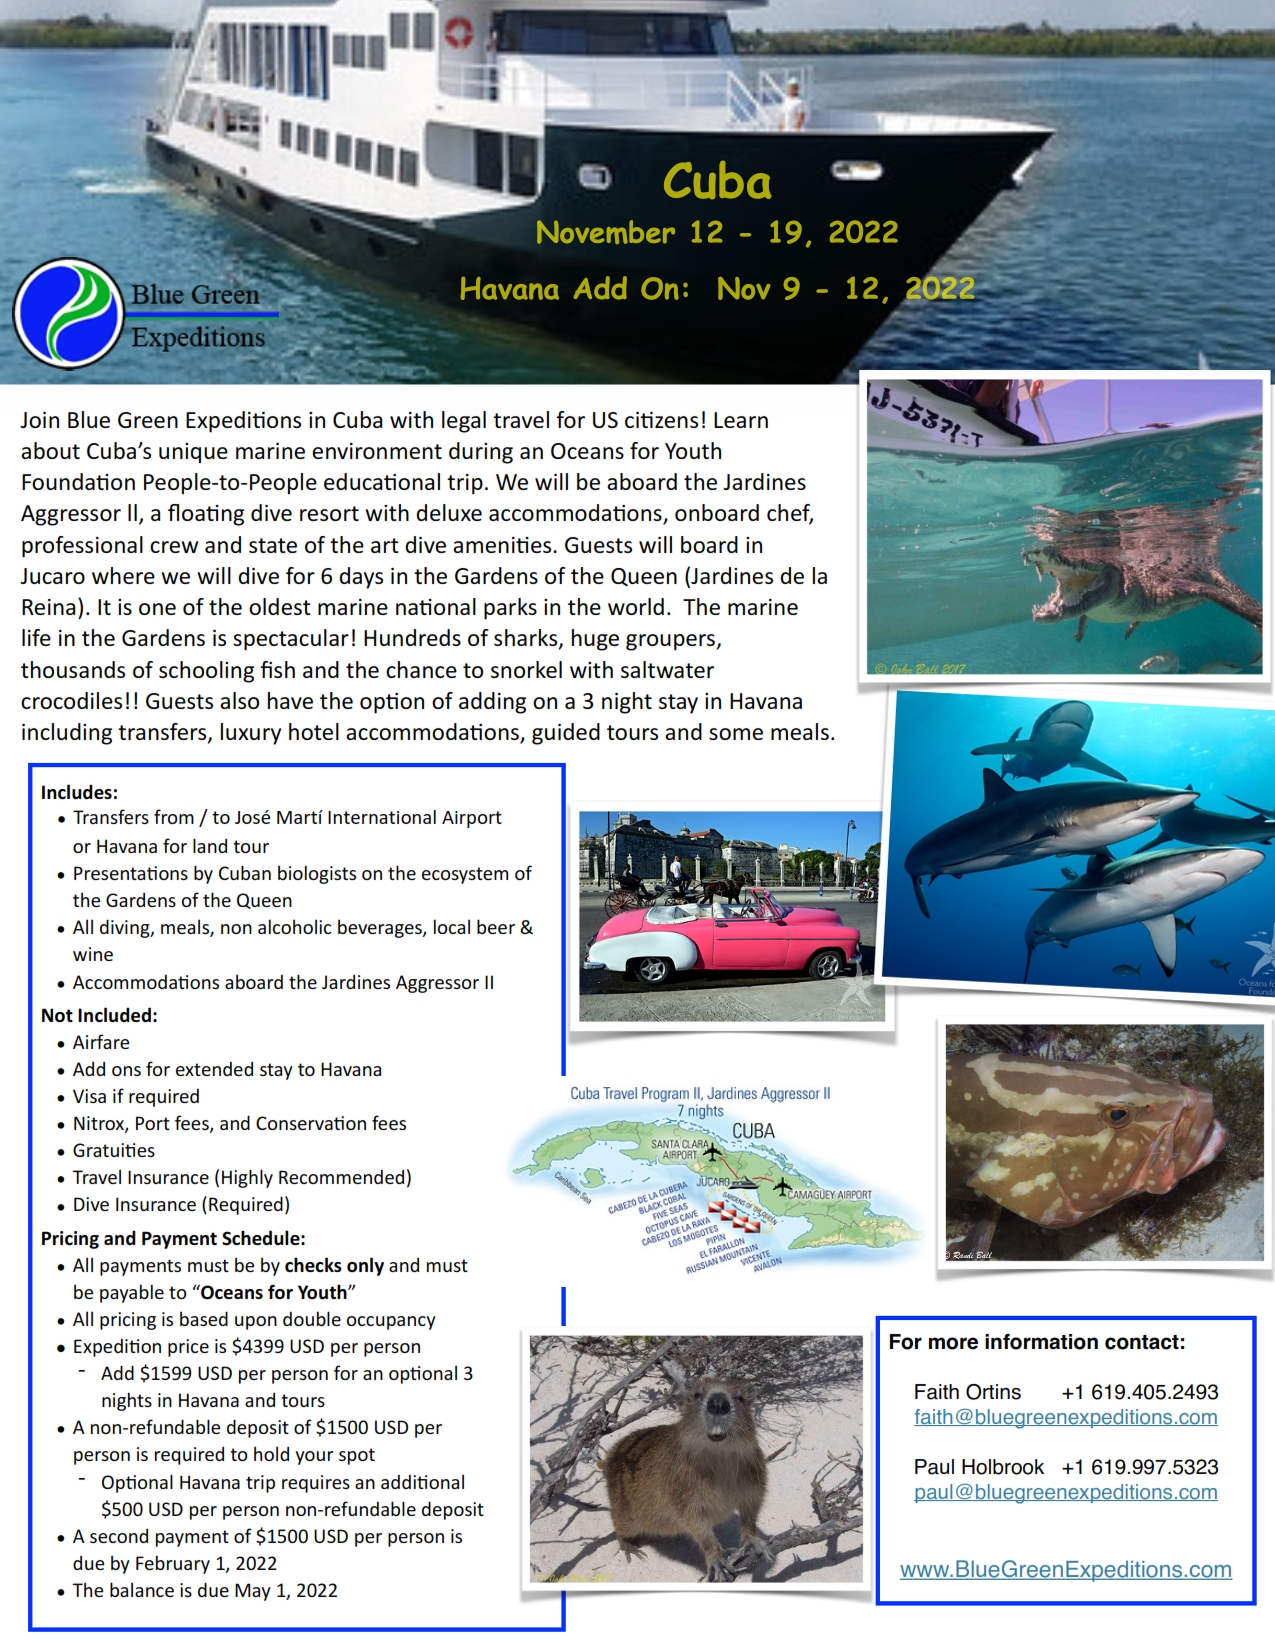 Cuba, November 12 - 19, 2022, expedition description and pricing. PDF flyer contains the same information.